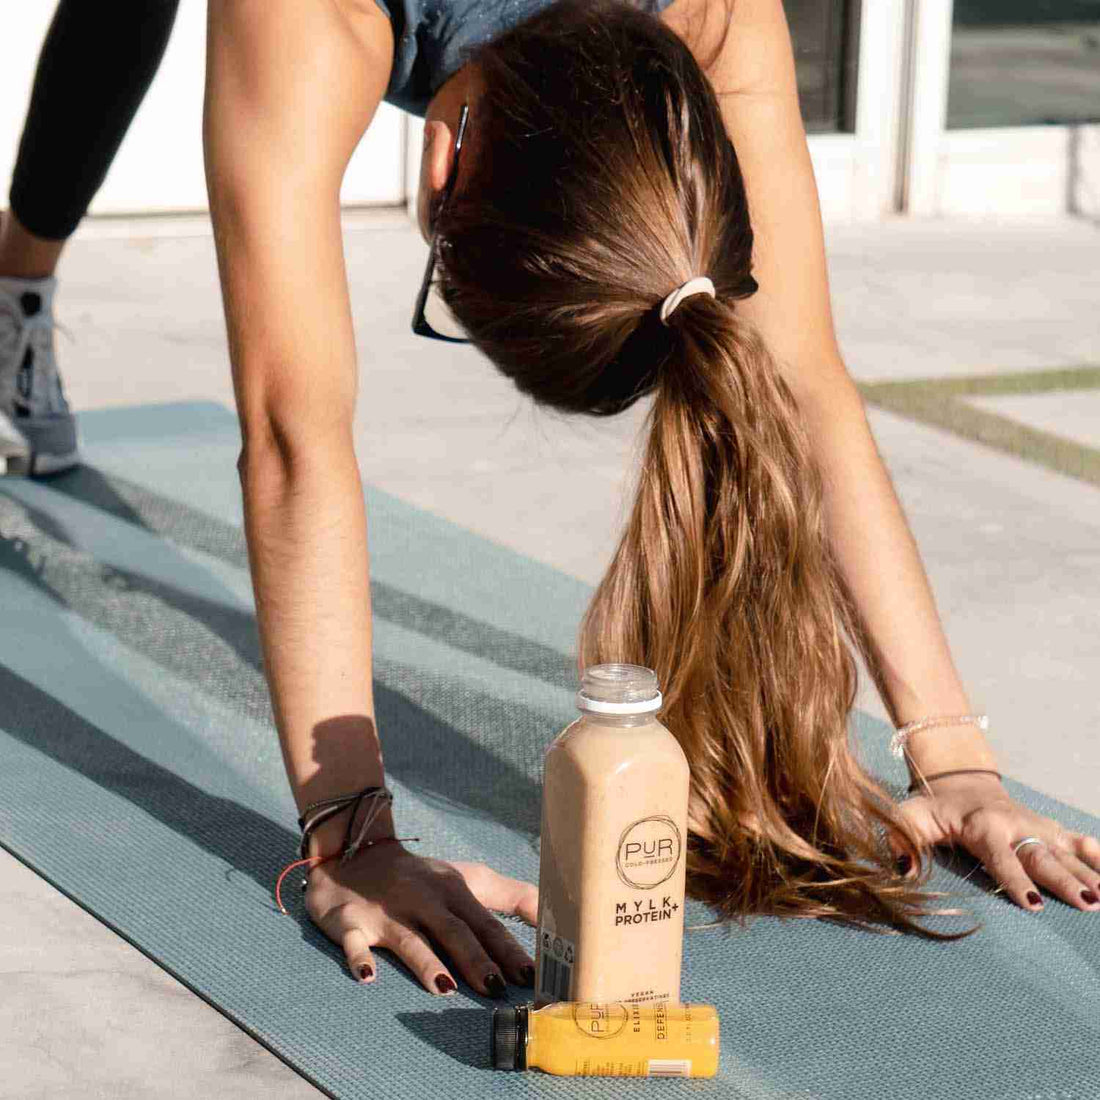 Best Static Yoga Poses For Quick Weight Loss - PUR Cold Pressed Juice